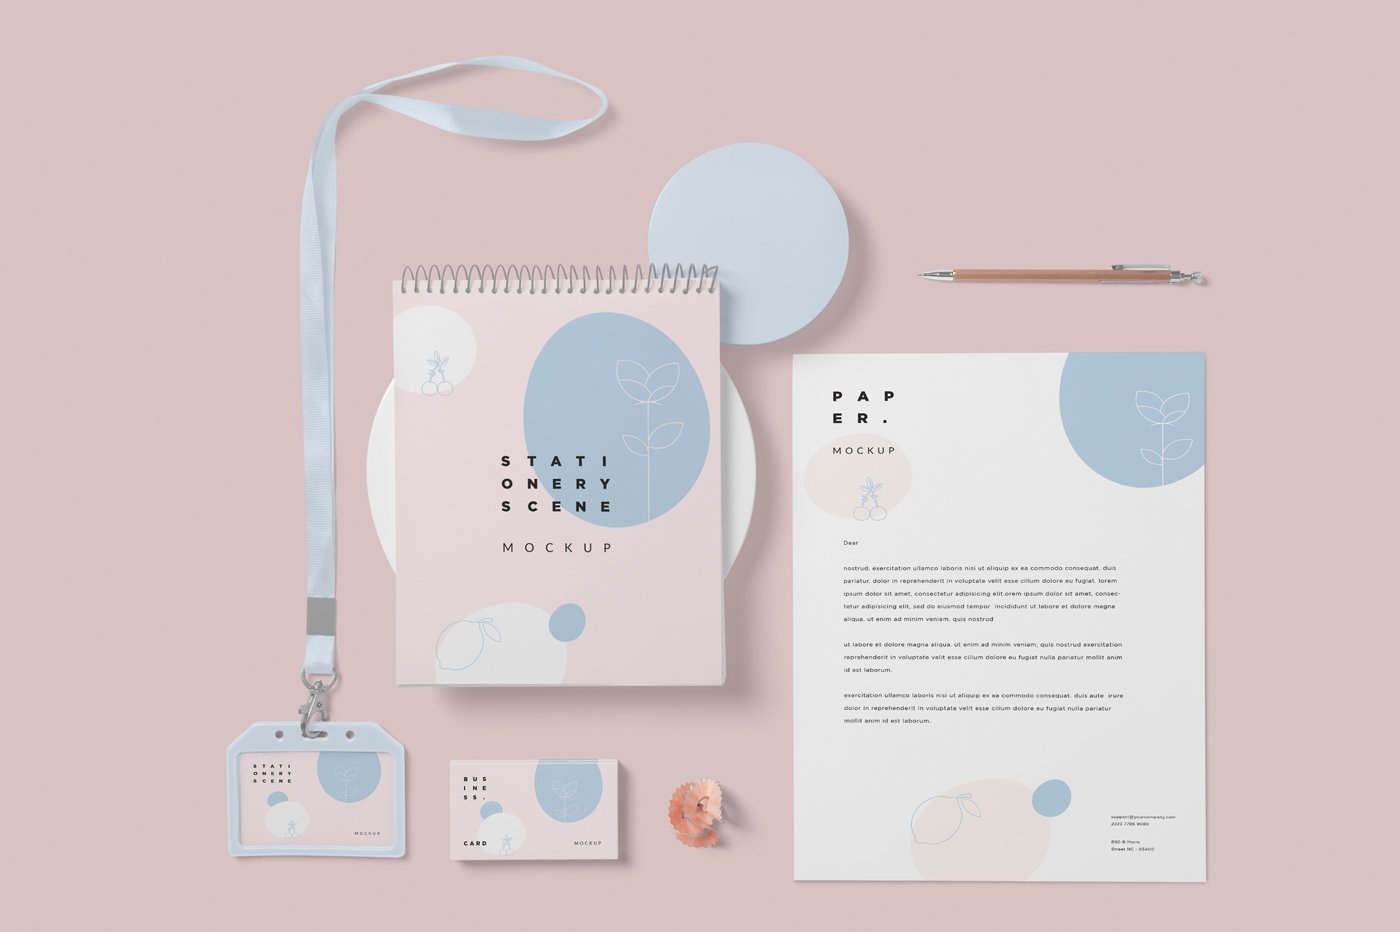 Stationery Mockup Scenes cover image.